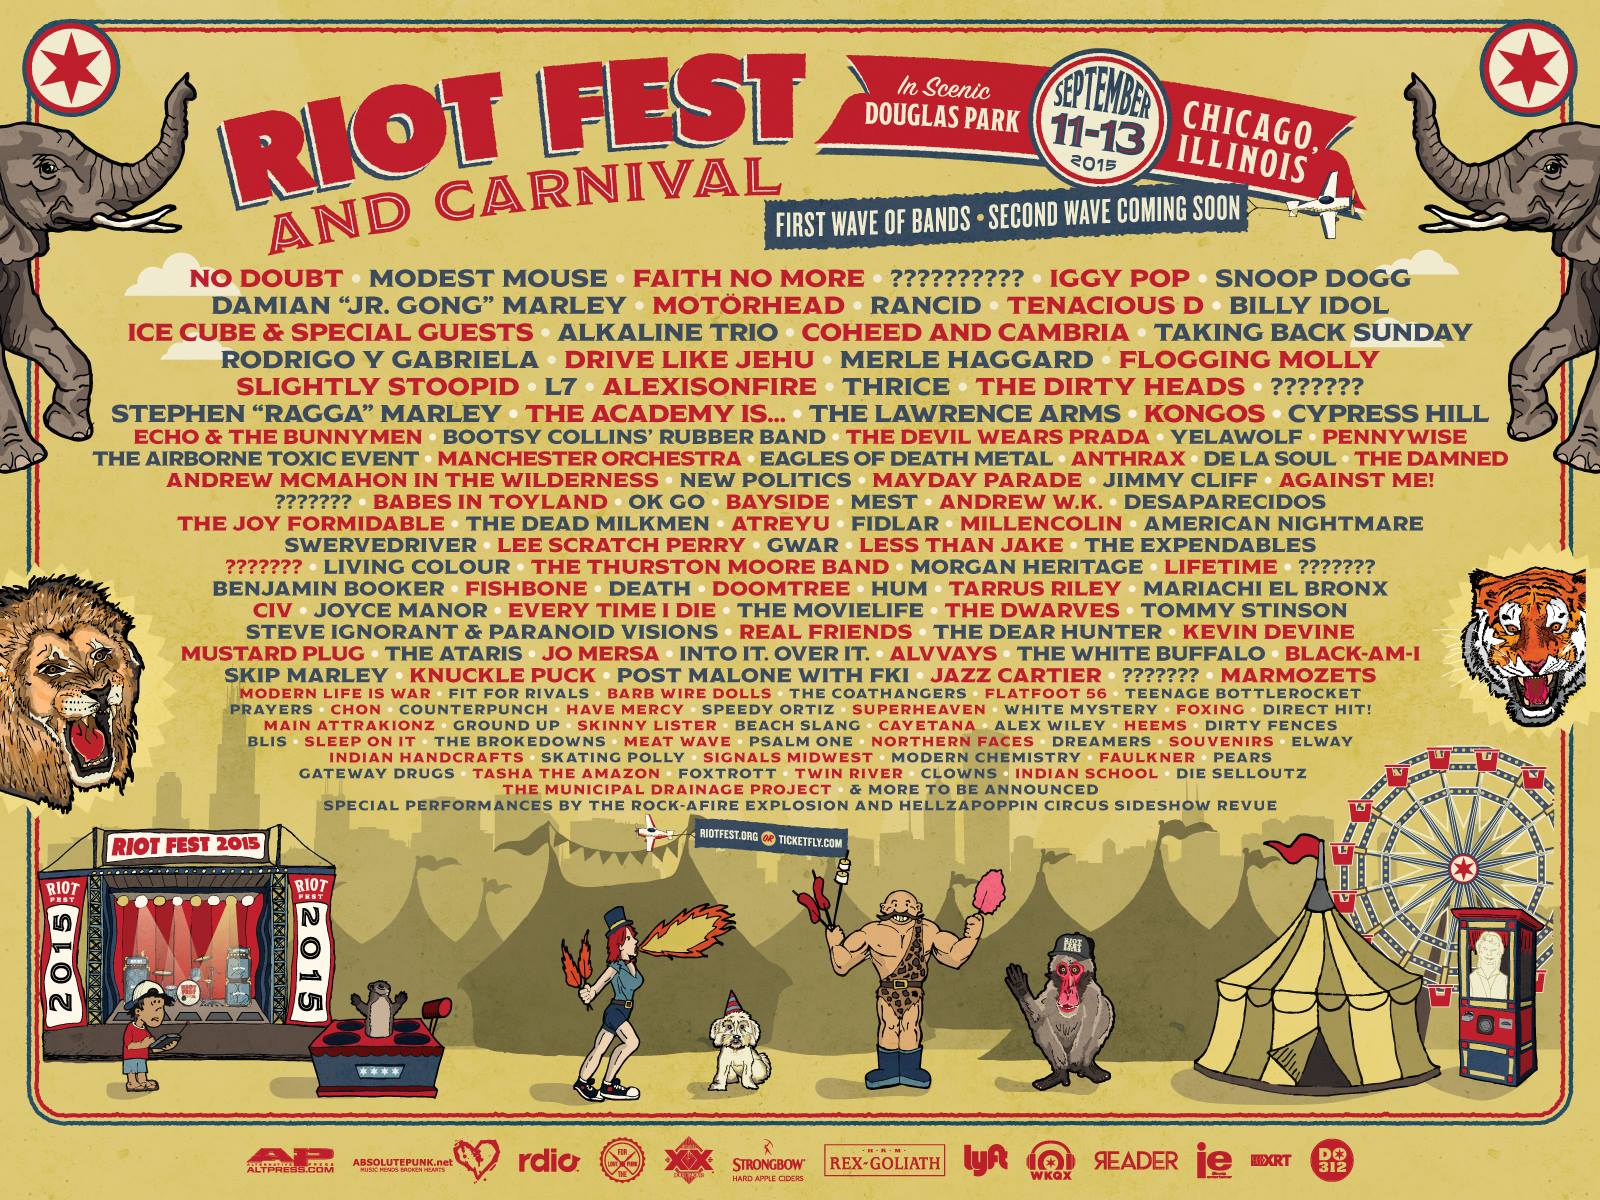 Playing Chicago Riot Fest in September